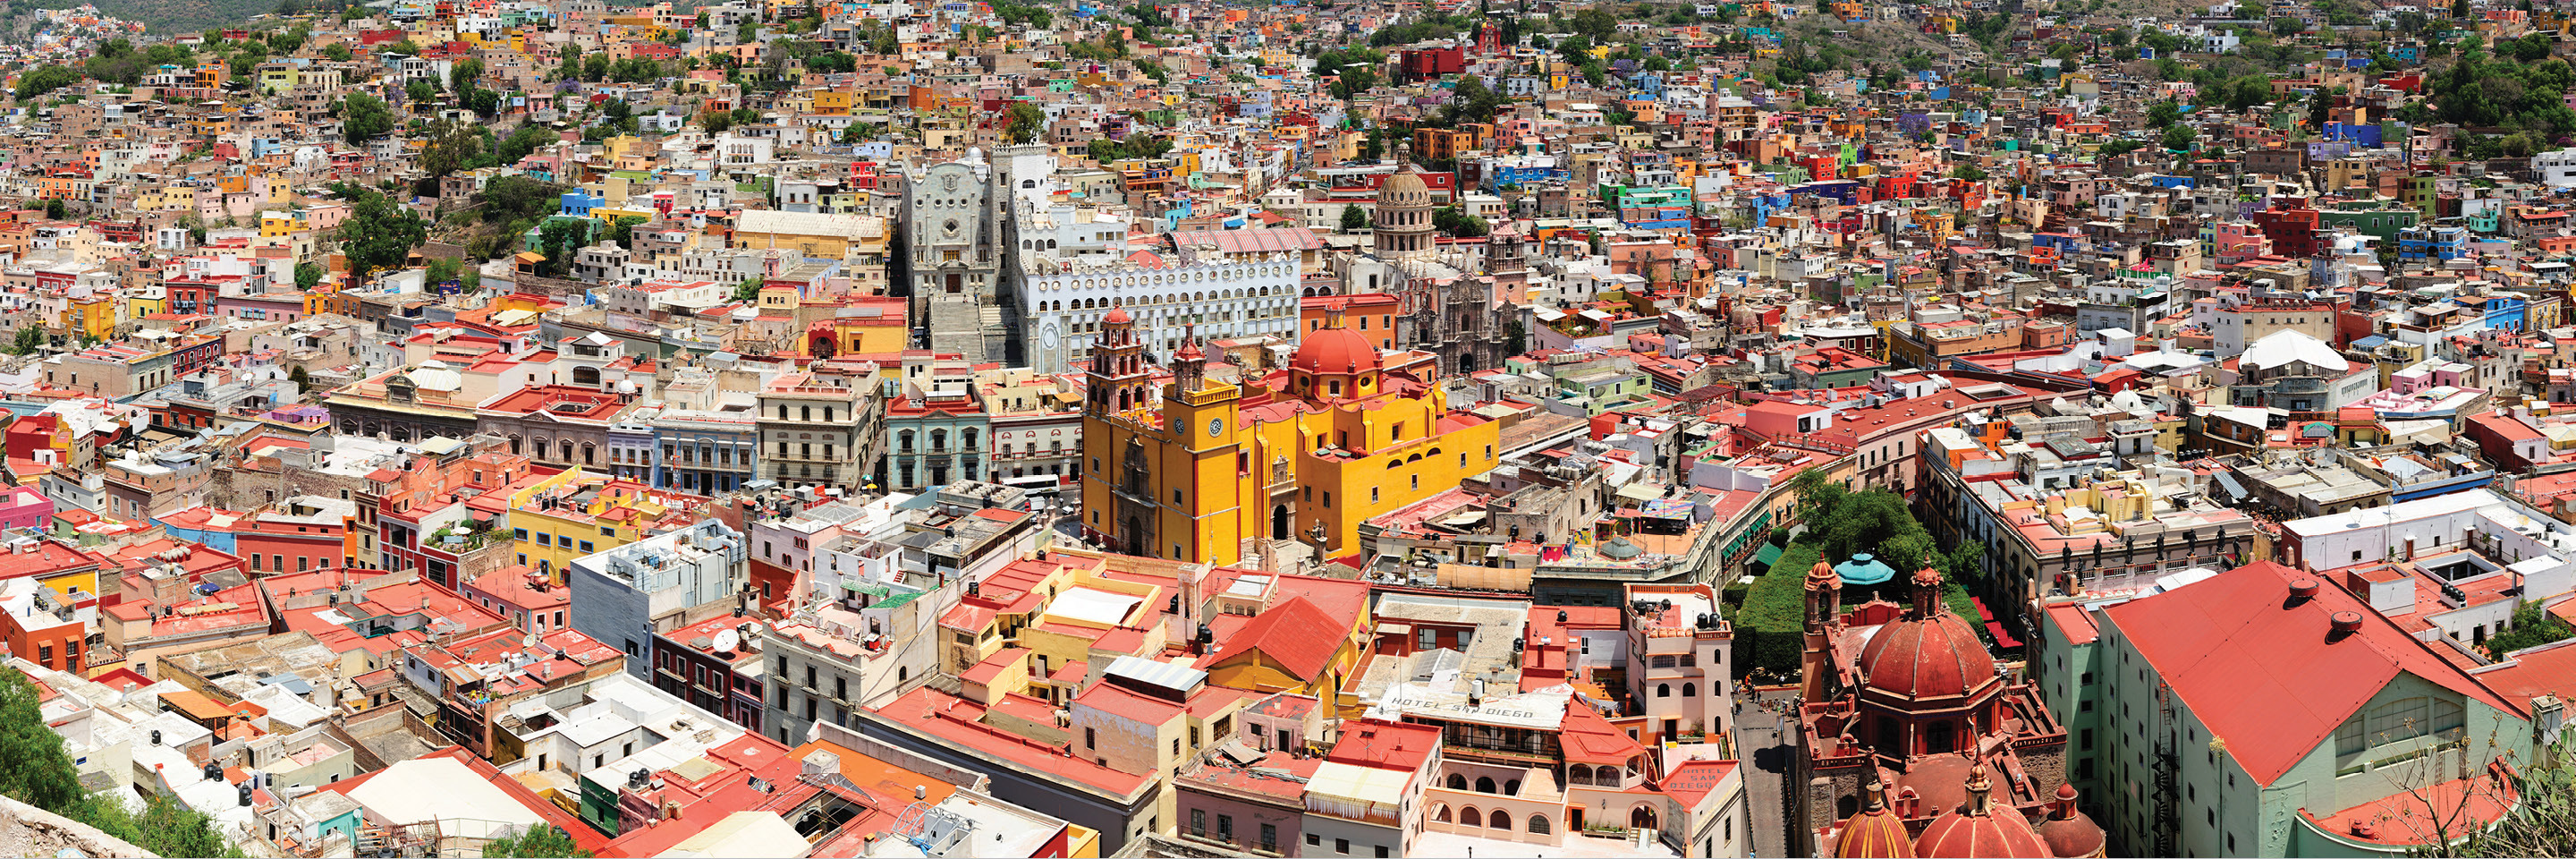 Mexico's Magical Colonial Cities